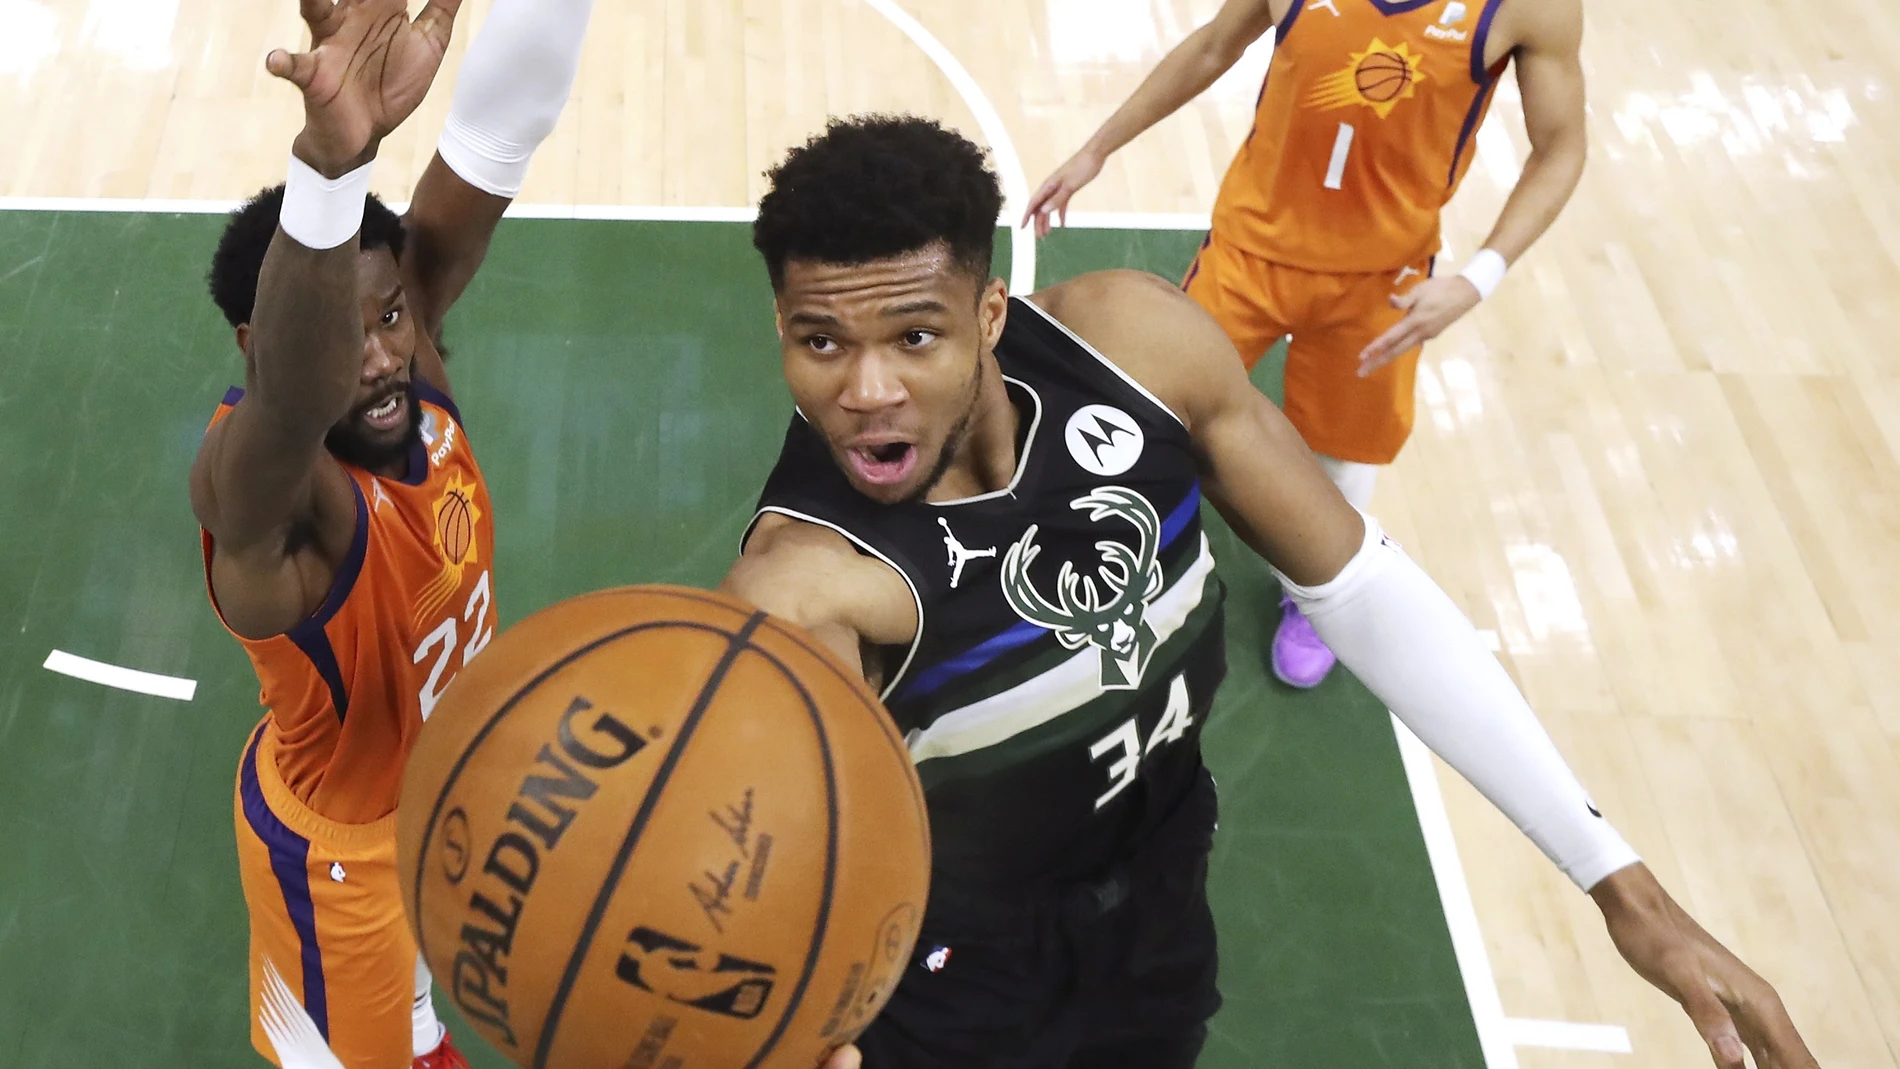 Milwaukee Bucks' Giannis Antetokounmpo shoots next to Phoenix Suns' Deandre Ayton, left, during the second half of Game 6 of basketball's NBA Finals, Tuesday, July 20, 2021, in Milwaukee. (Justin Casterline/Pool Photo via AP)